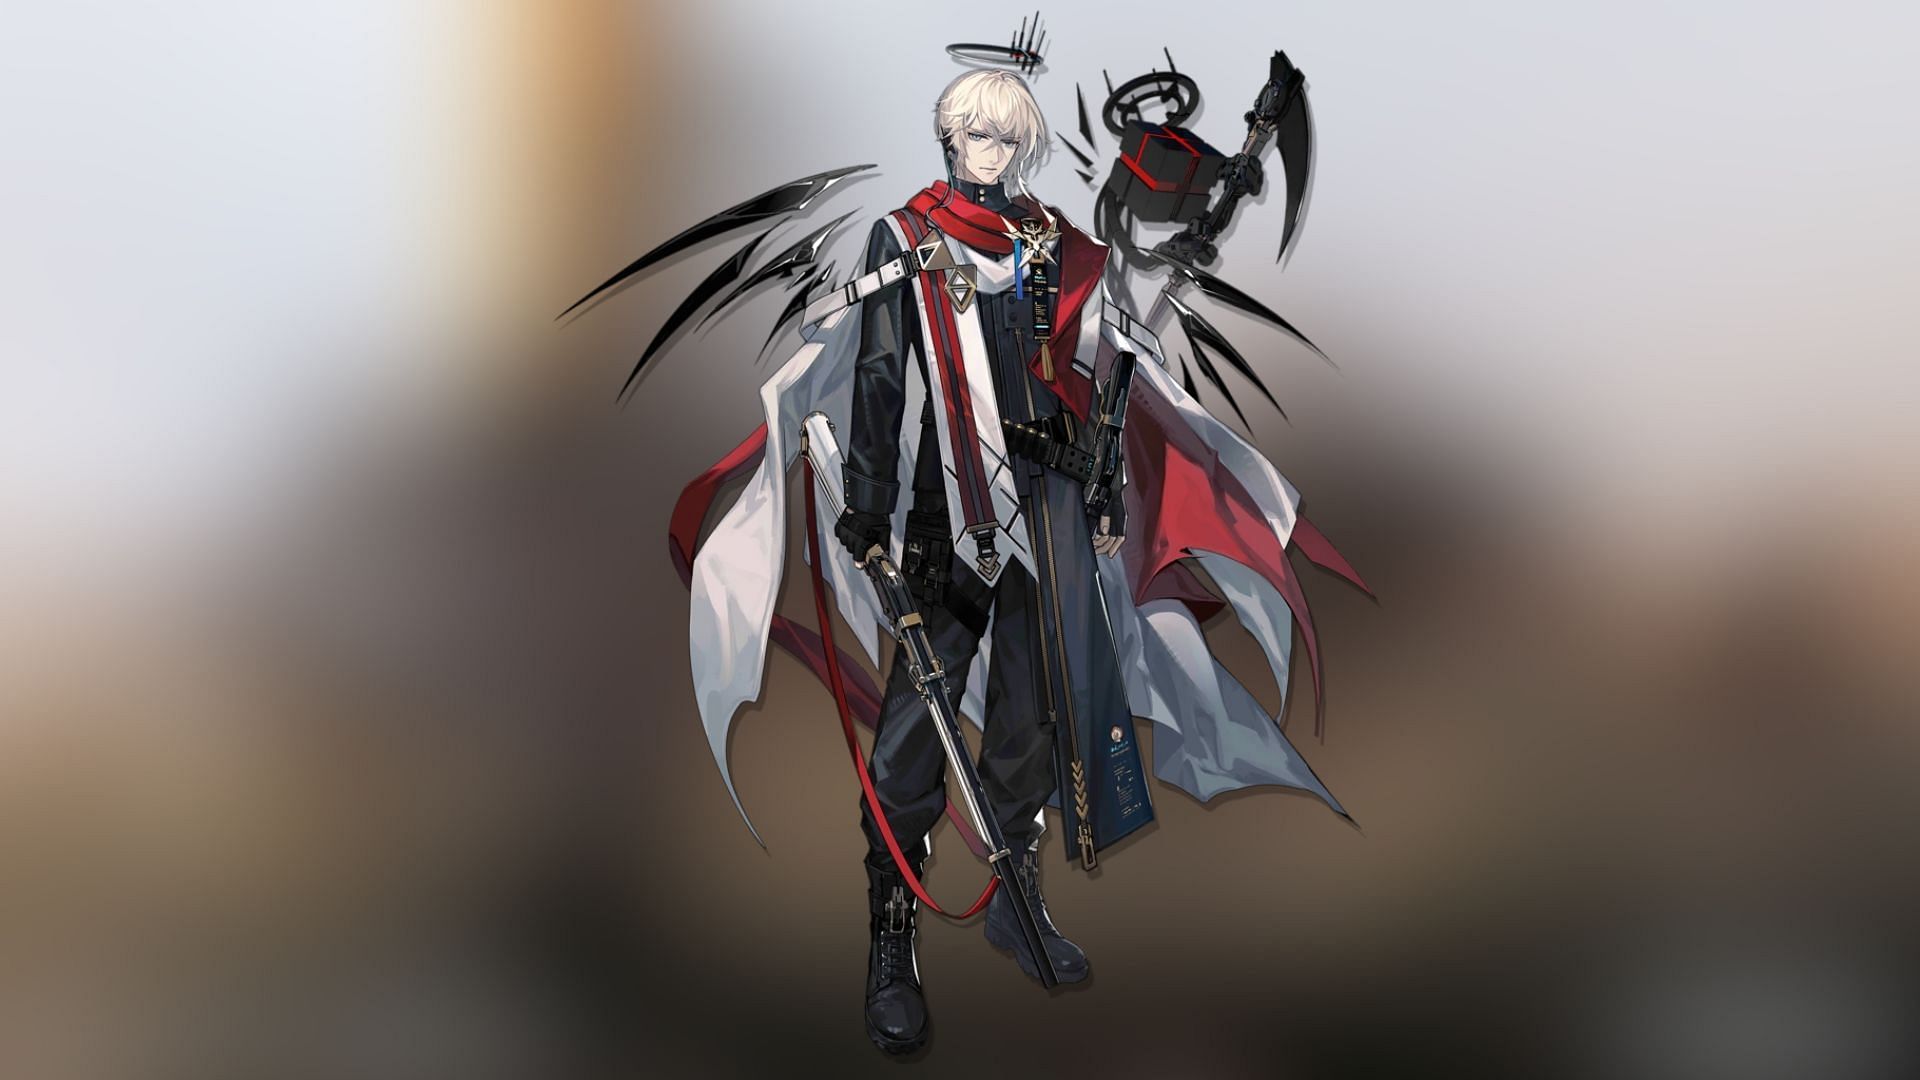 Executor the Ex Foedere is one of best Arknights from Guard class. (Image via Hypergryph)